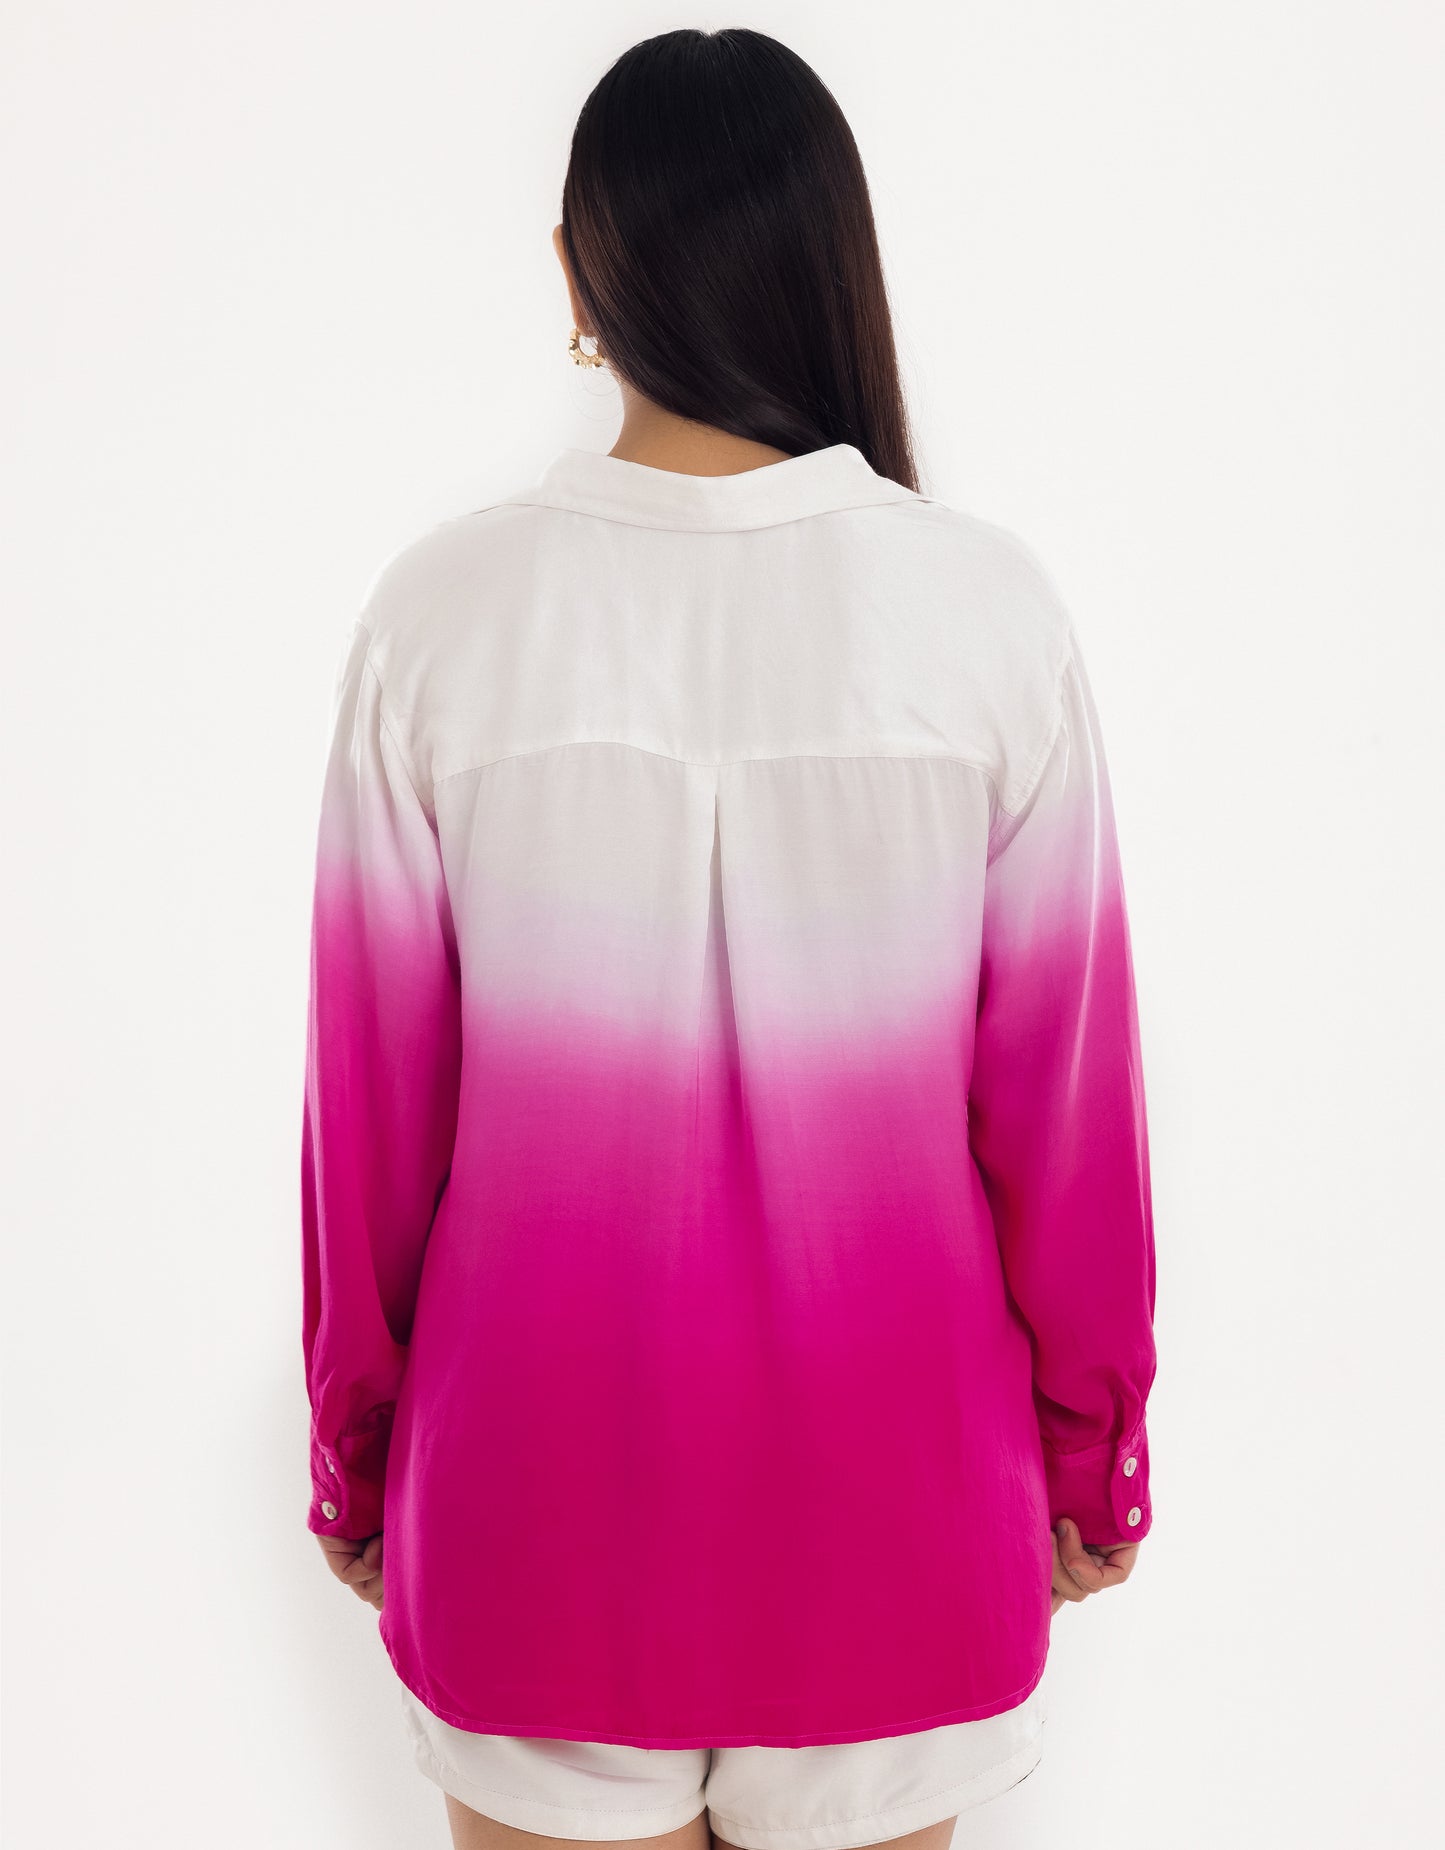 Back view display of Hueloom's Cosmopolitan capsule with oversized shirt, bandeau top and shorts in pink.